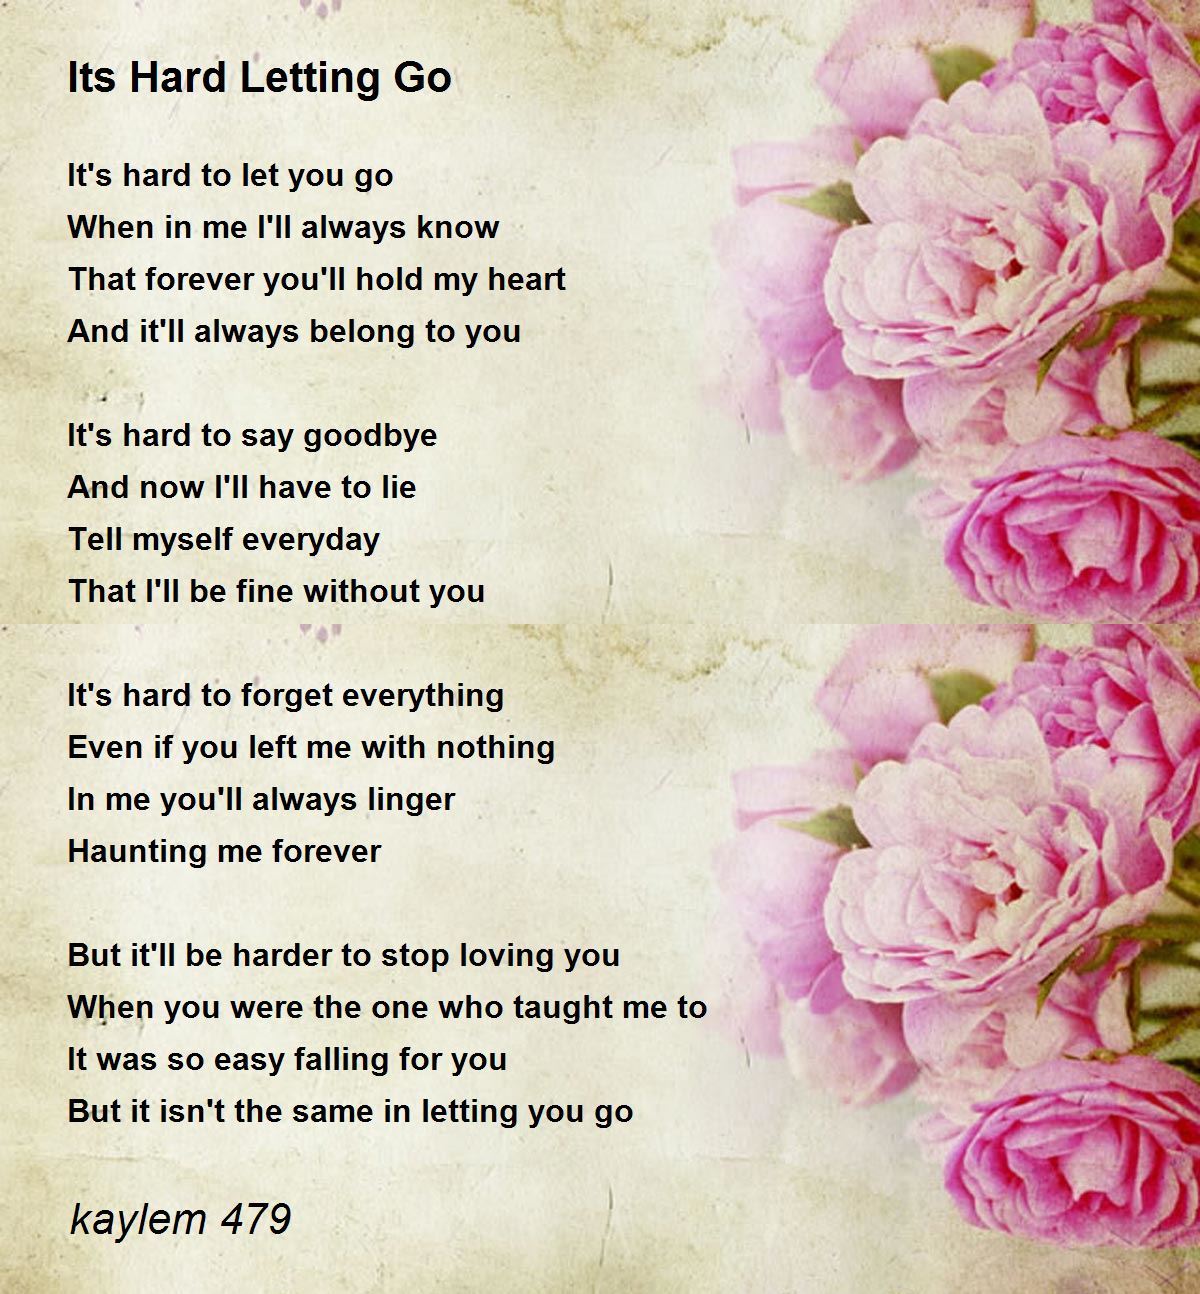 Go poem let to To Let